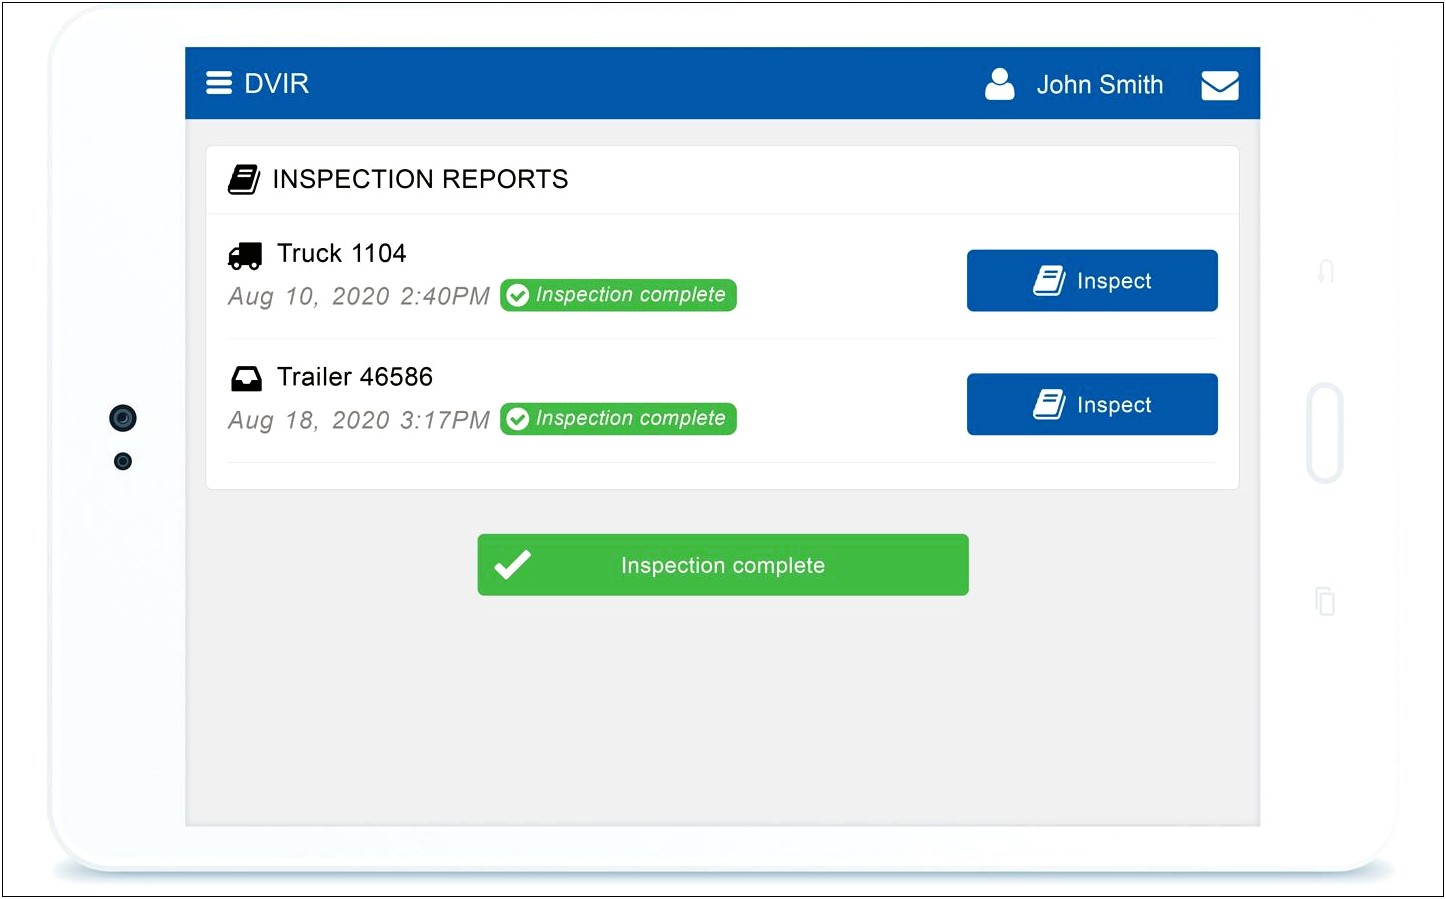 Free Driver's Vehicle Inspection Report Template